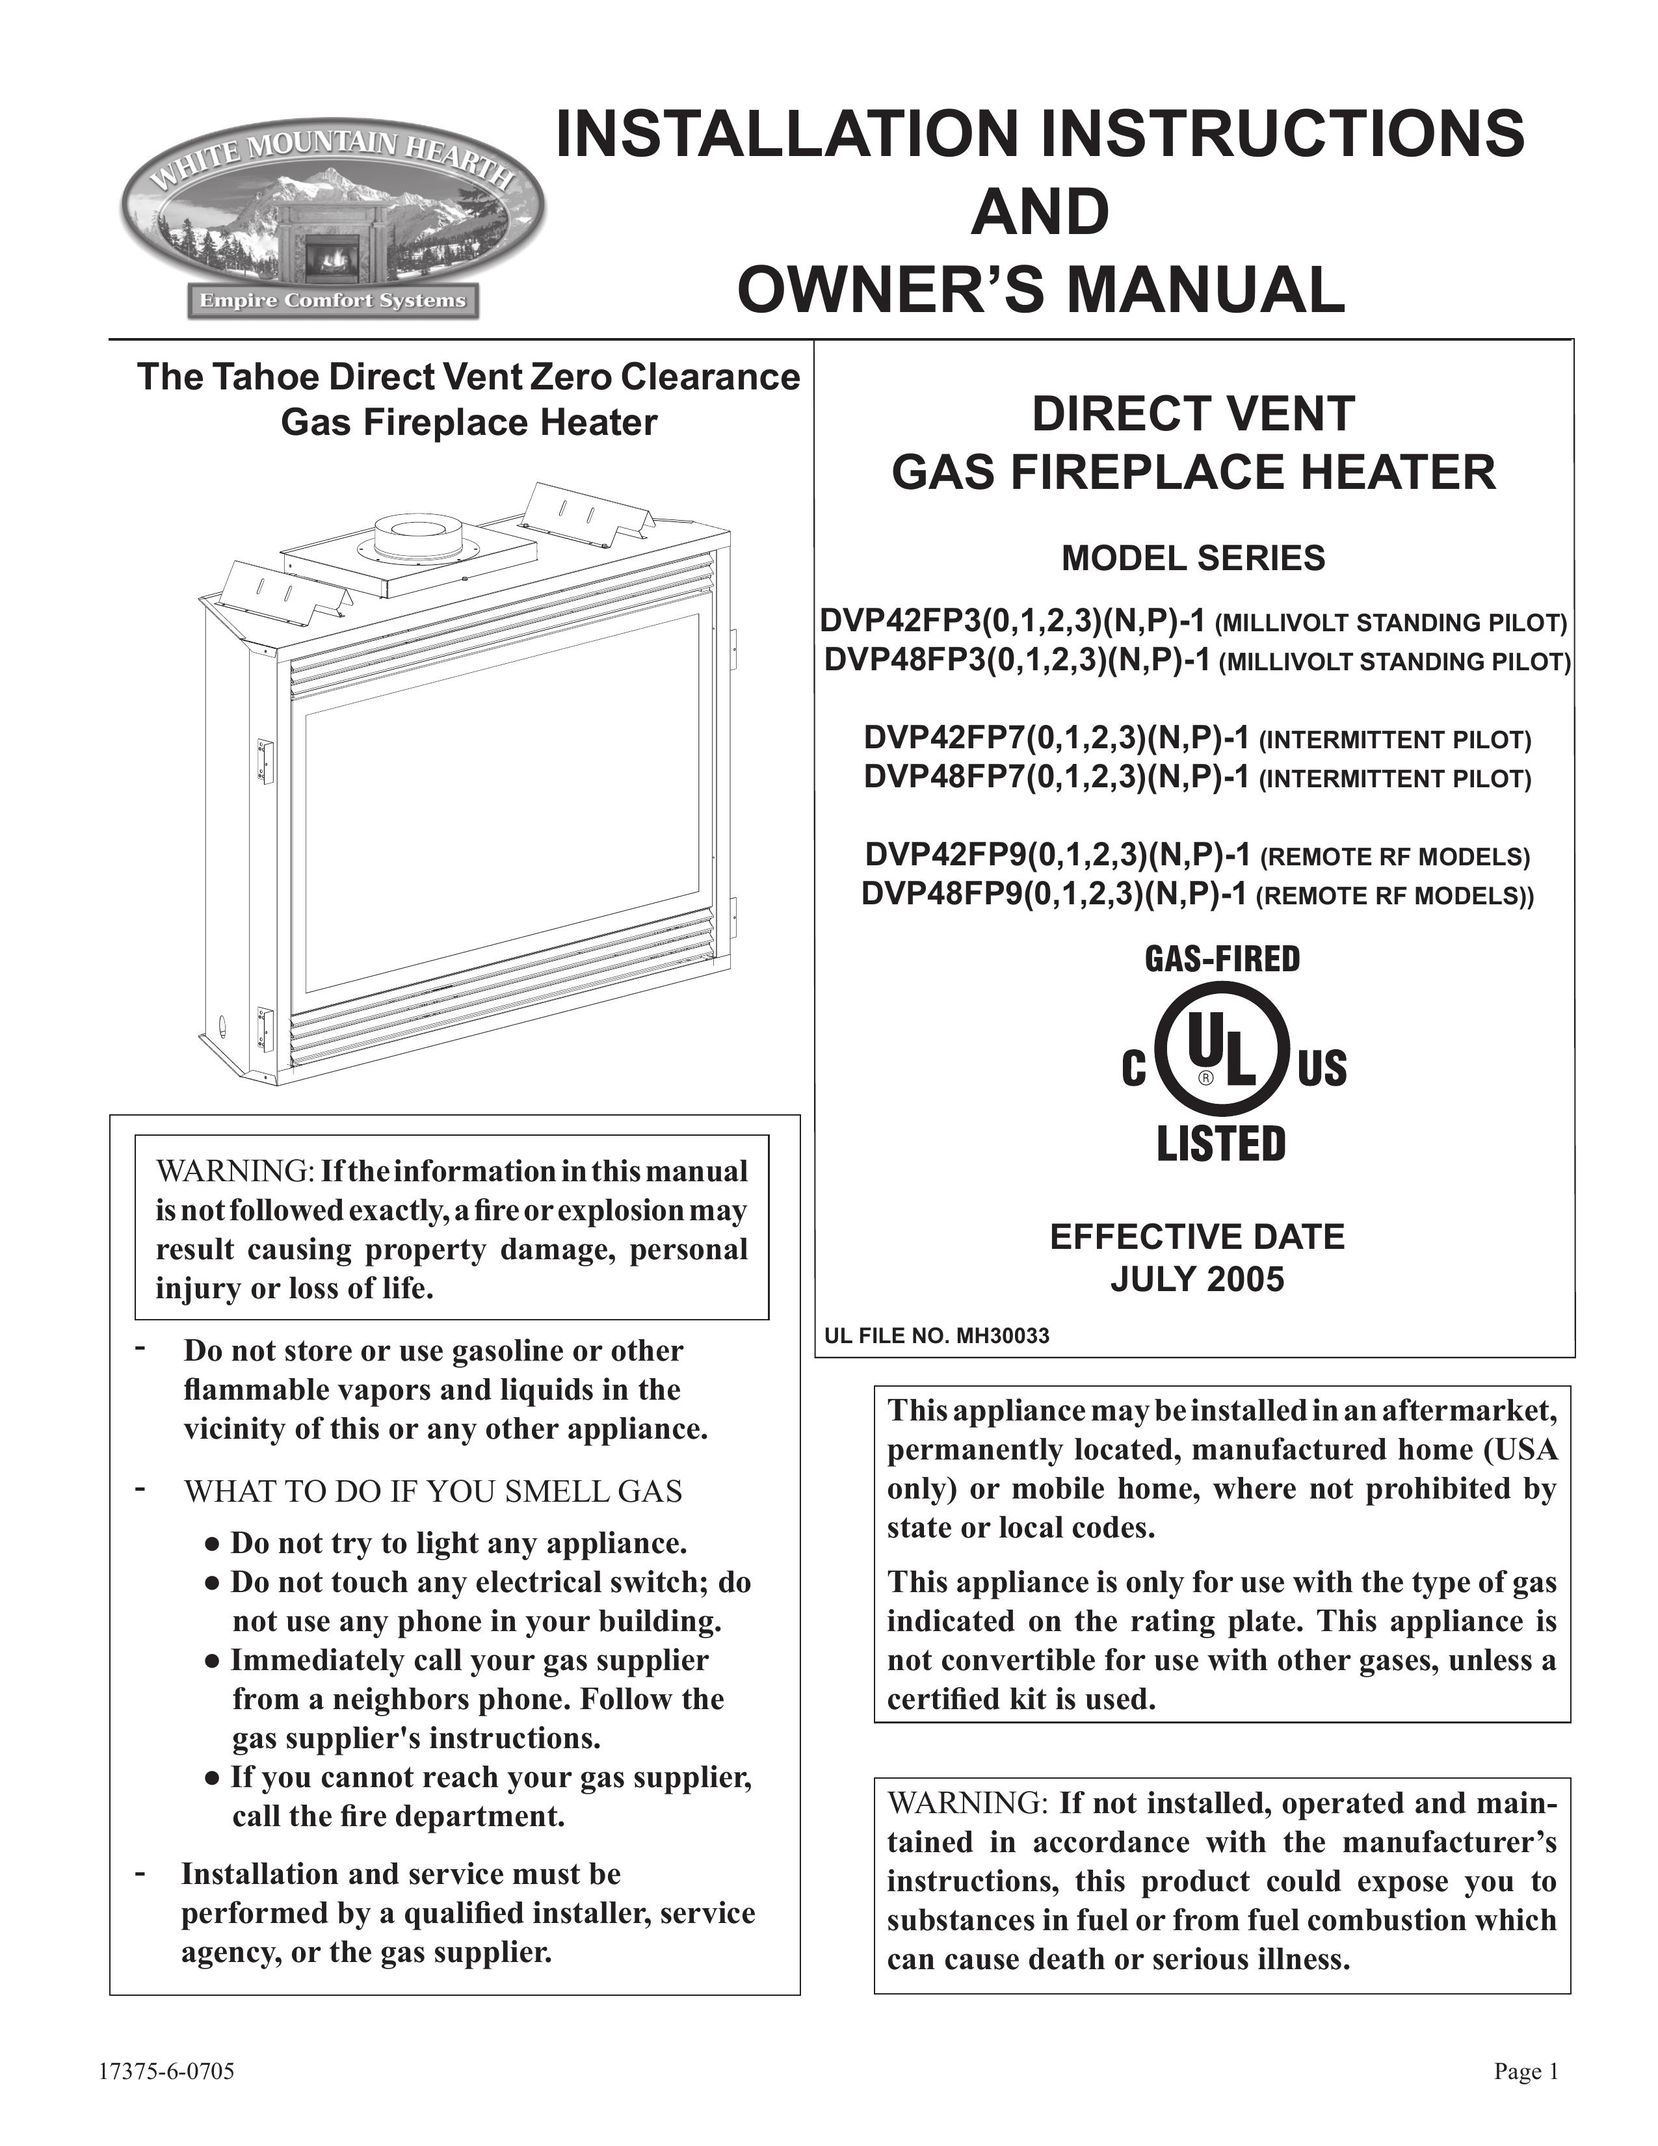 Empire Comfort Systems DVP42FP3 Water Heater User Manual